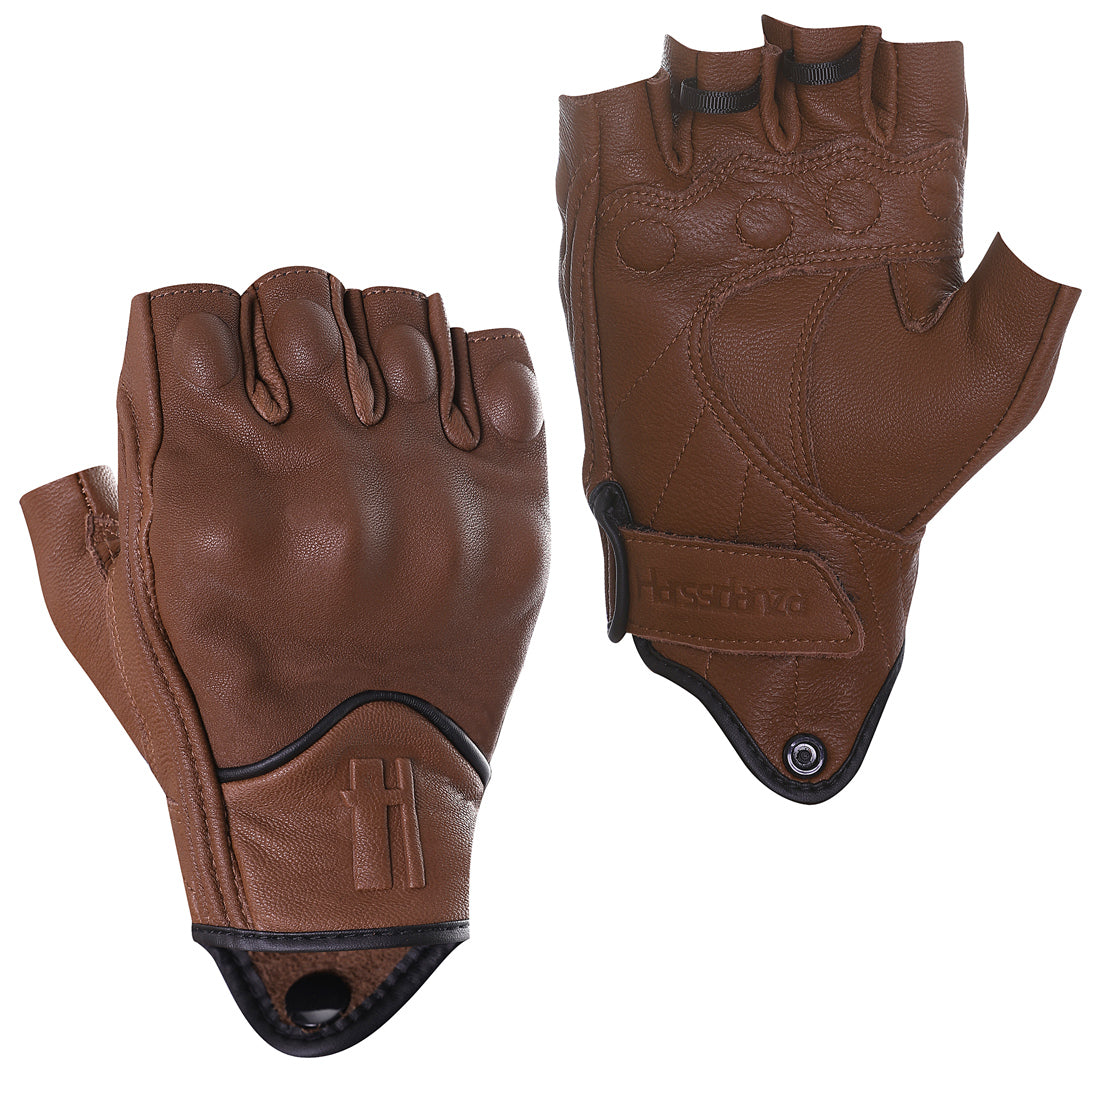 Men's Fingerless Motorcycle Gloves – Dynamicleather